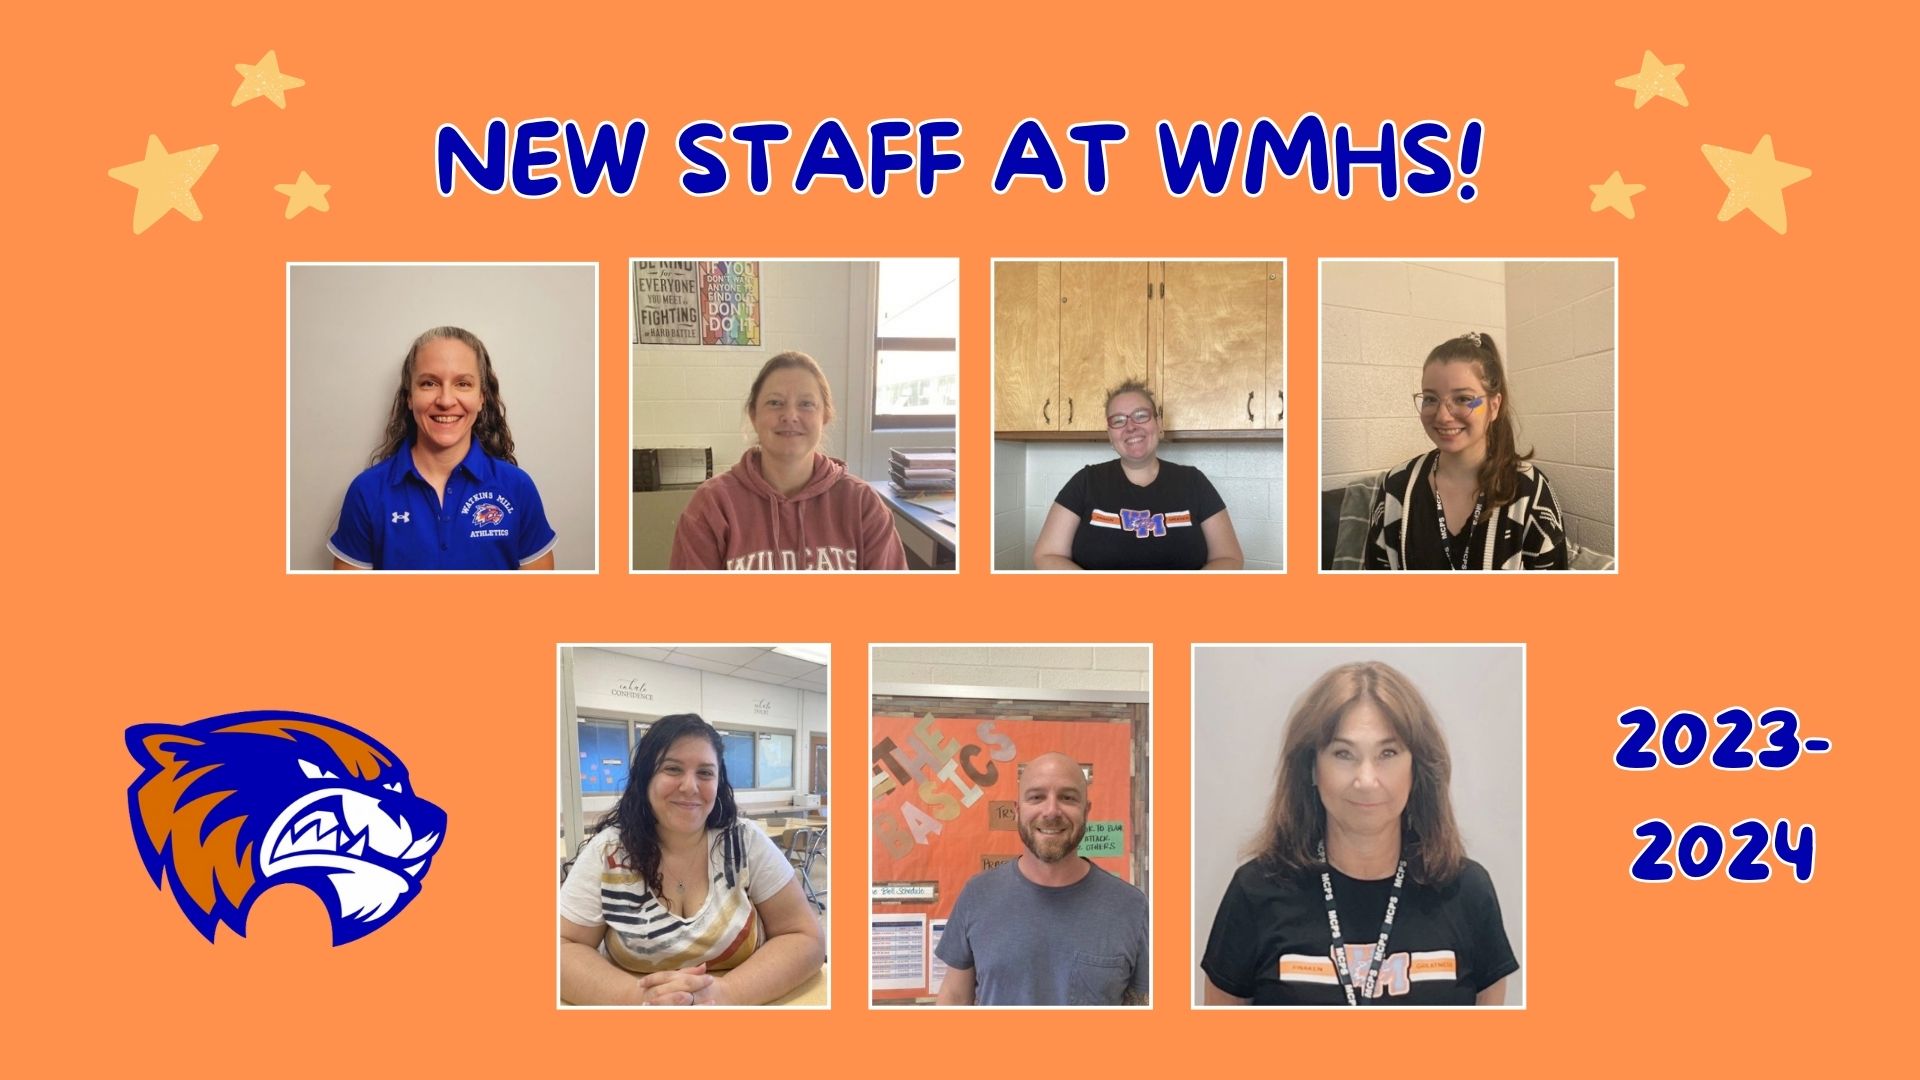 The Current welcomes the new staff who are excited to join our community. 